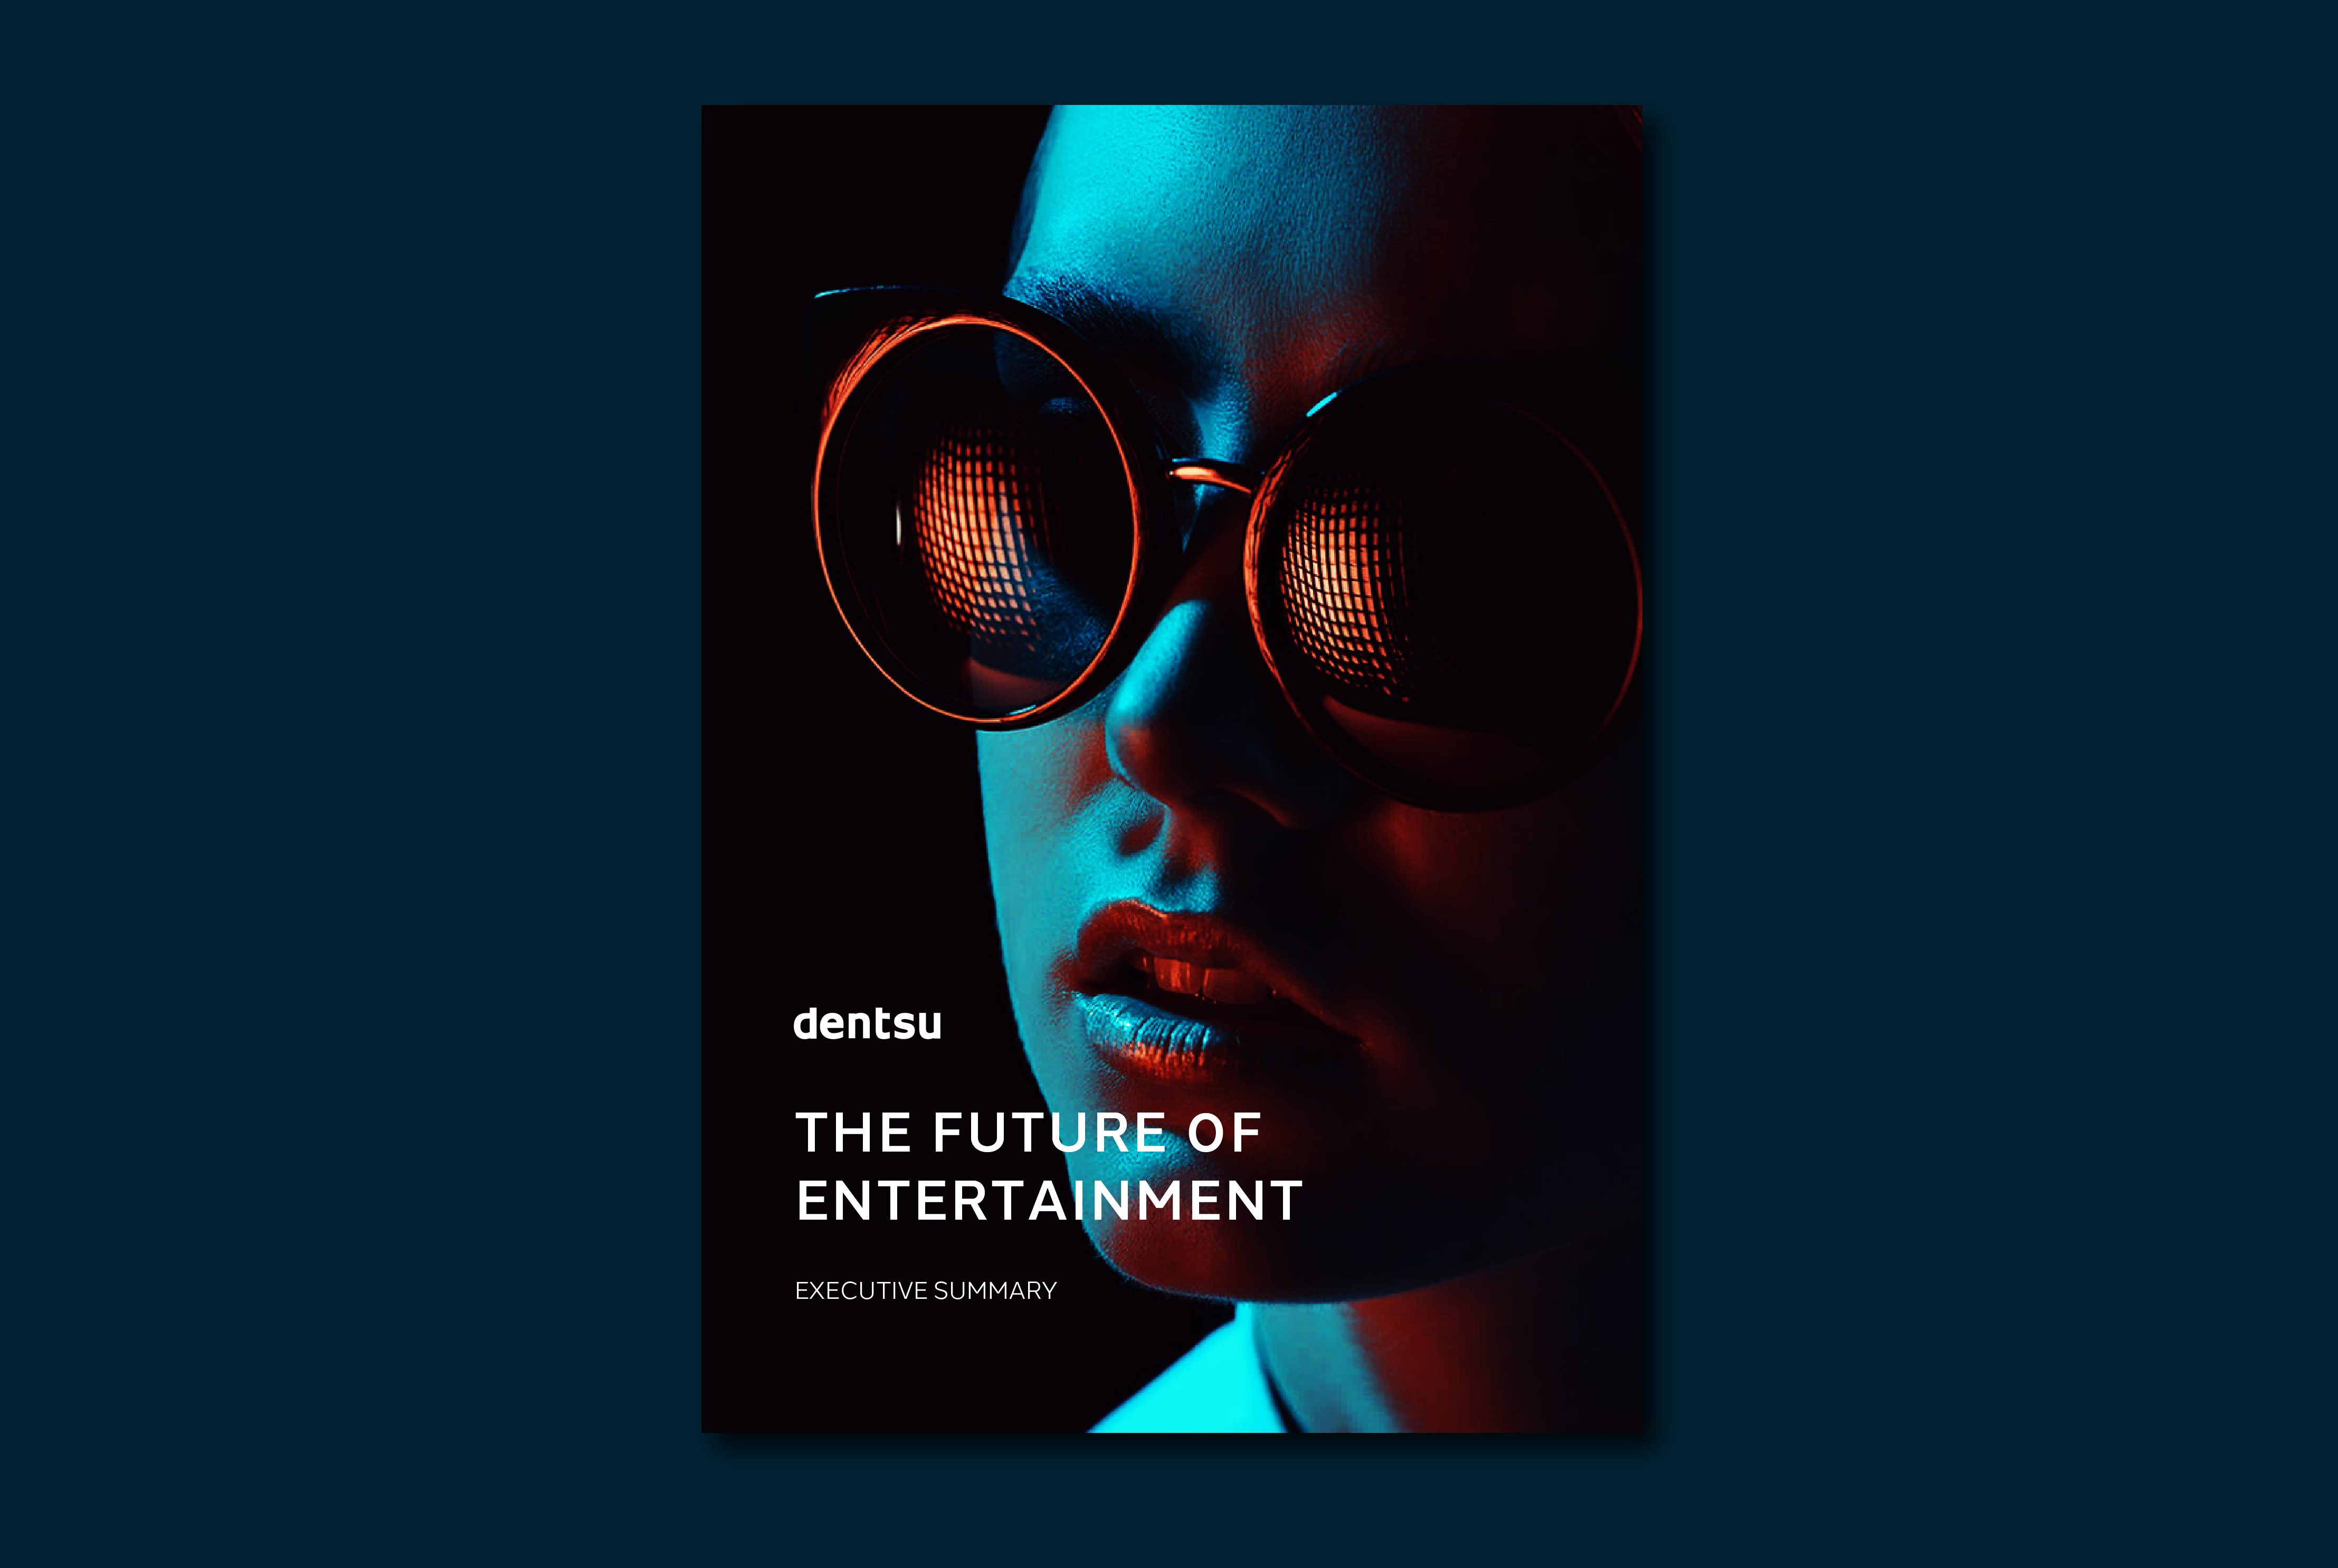 The Future of Entertainment - from dentsu Intelligence